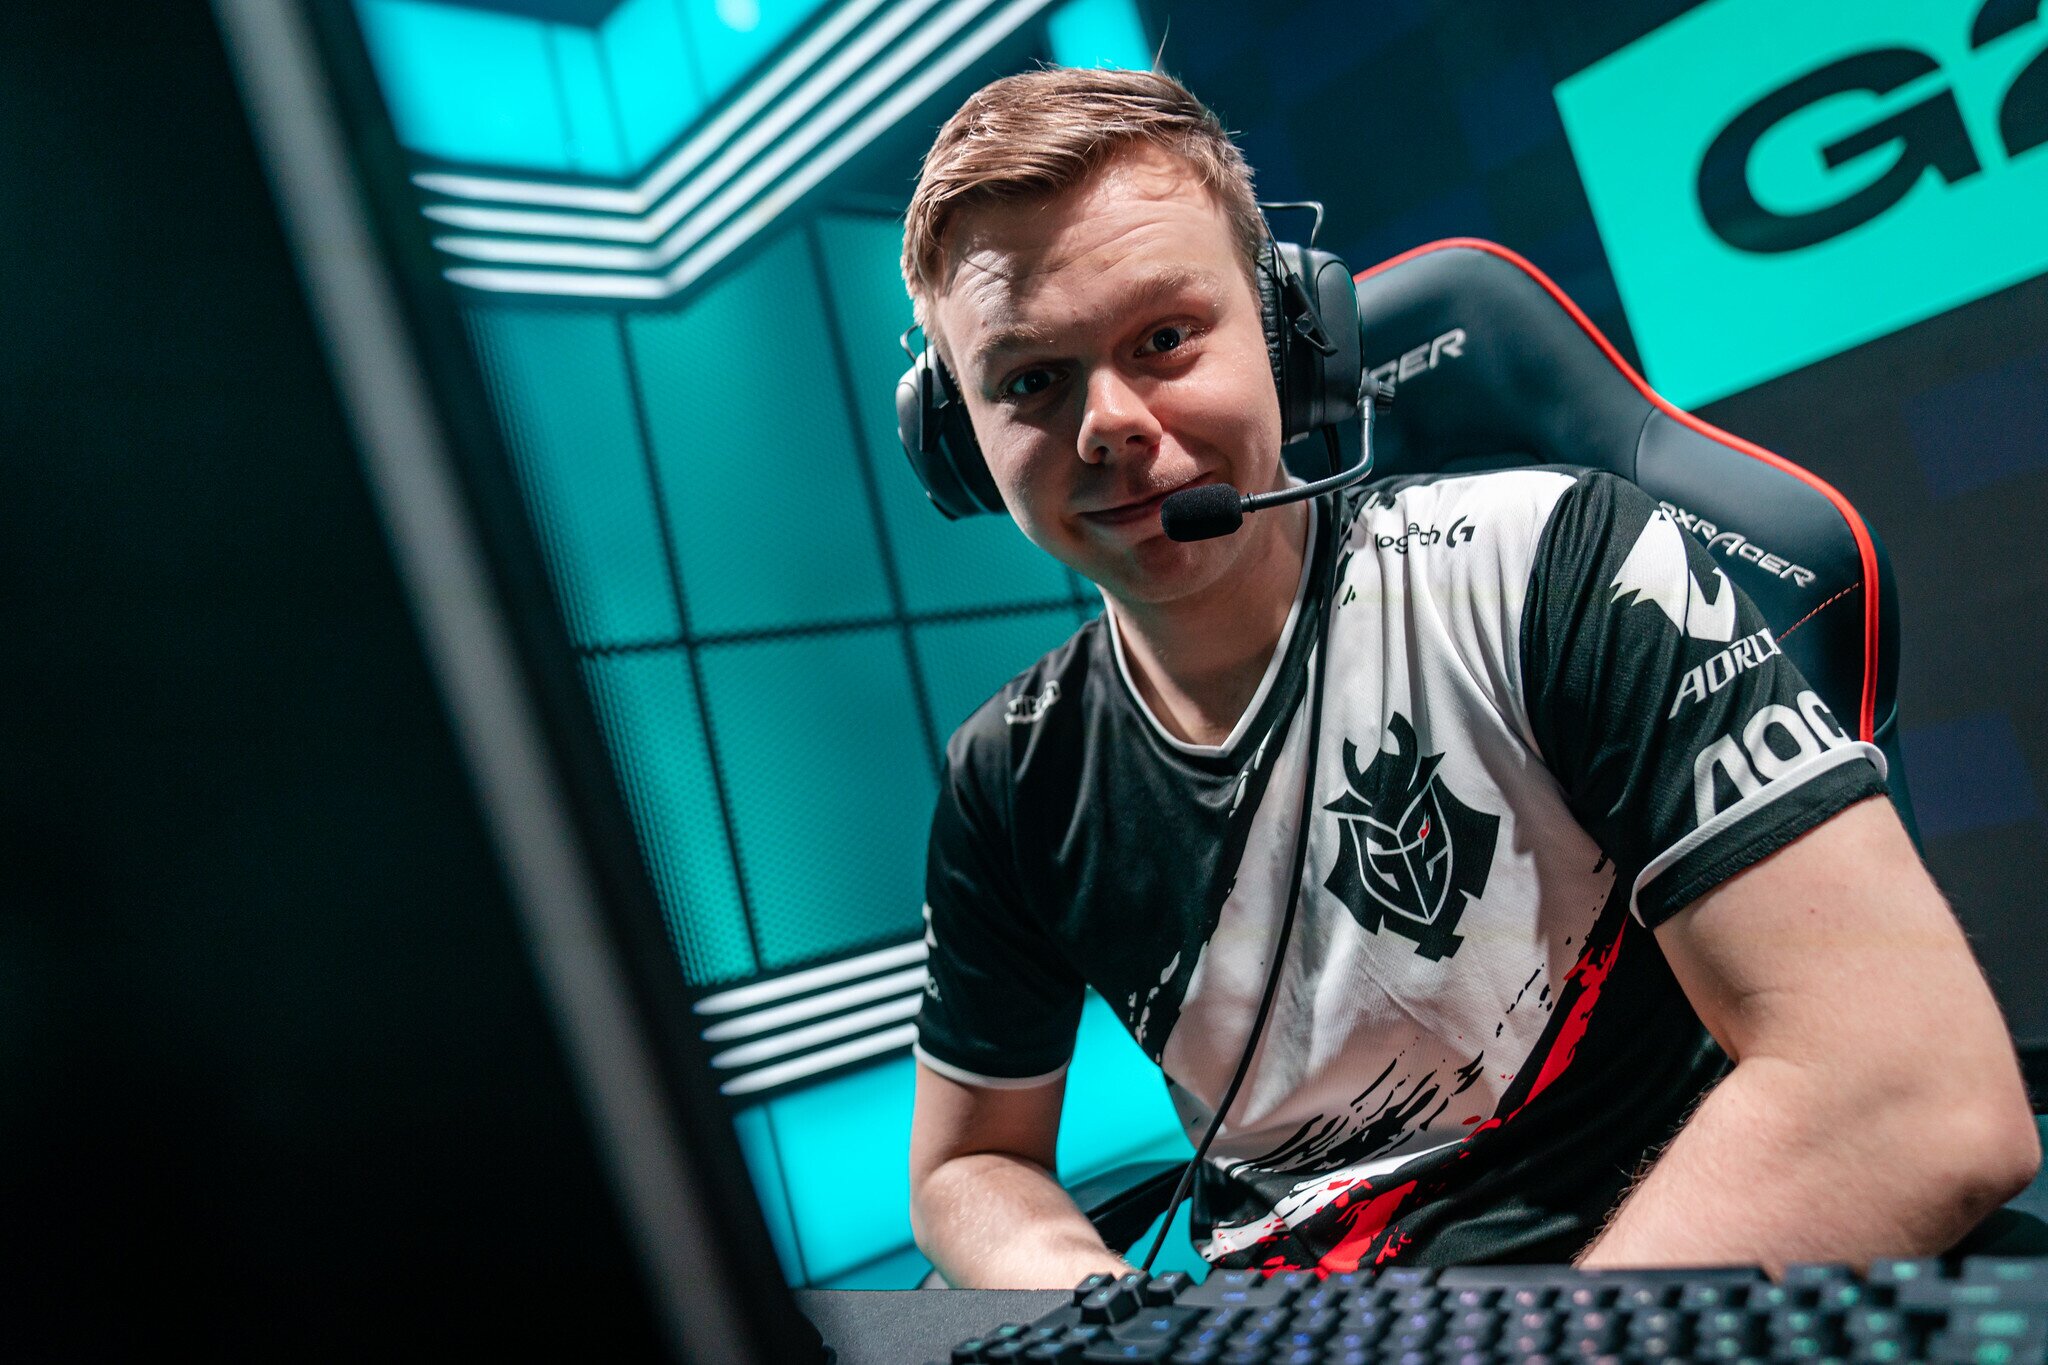 "I would like to have at least one smite top laner that I can play in the future" - Wunder (Photo courtesy of Riot Games)